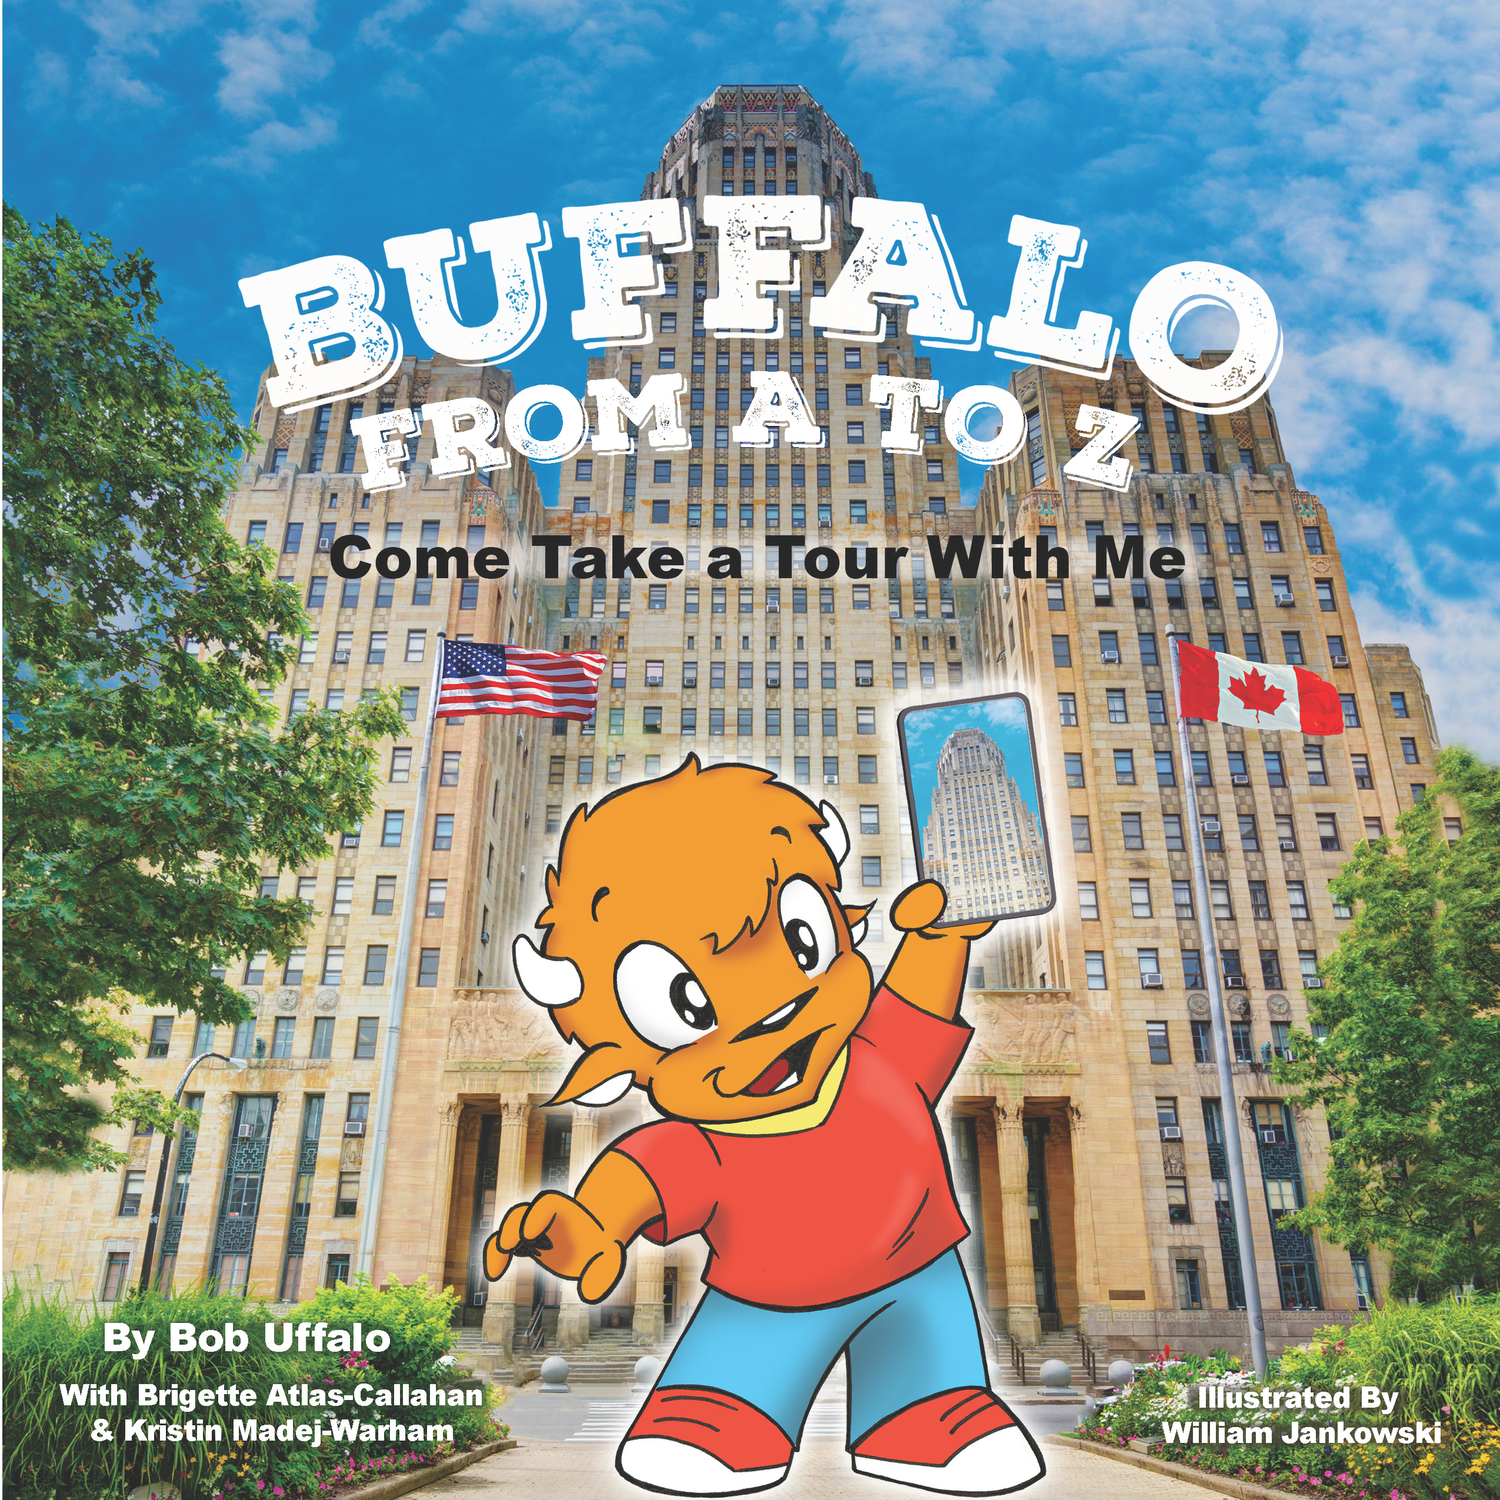 Buffalo From A-Z Come Take A Tour With Me (soft cover)